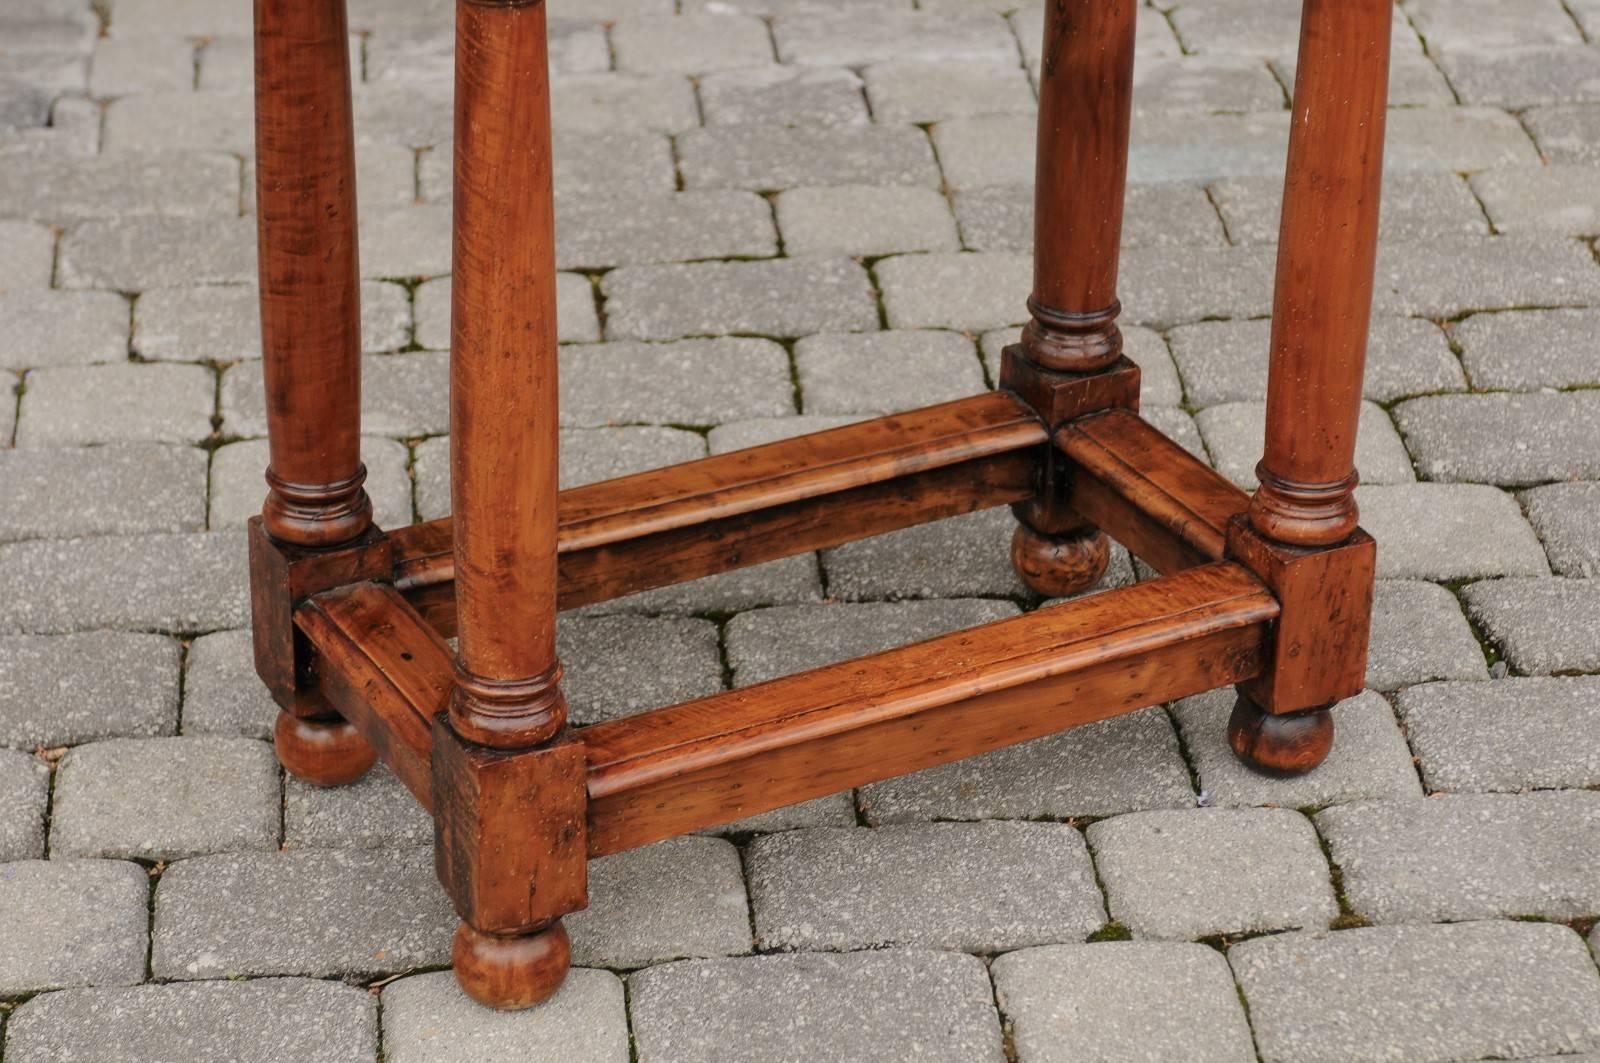 French Empire Style Mid-19th Century Fruitwood Side Table with Doric Column Legs For Sale 7